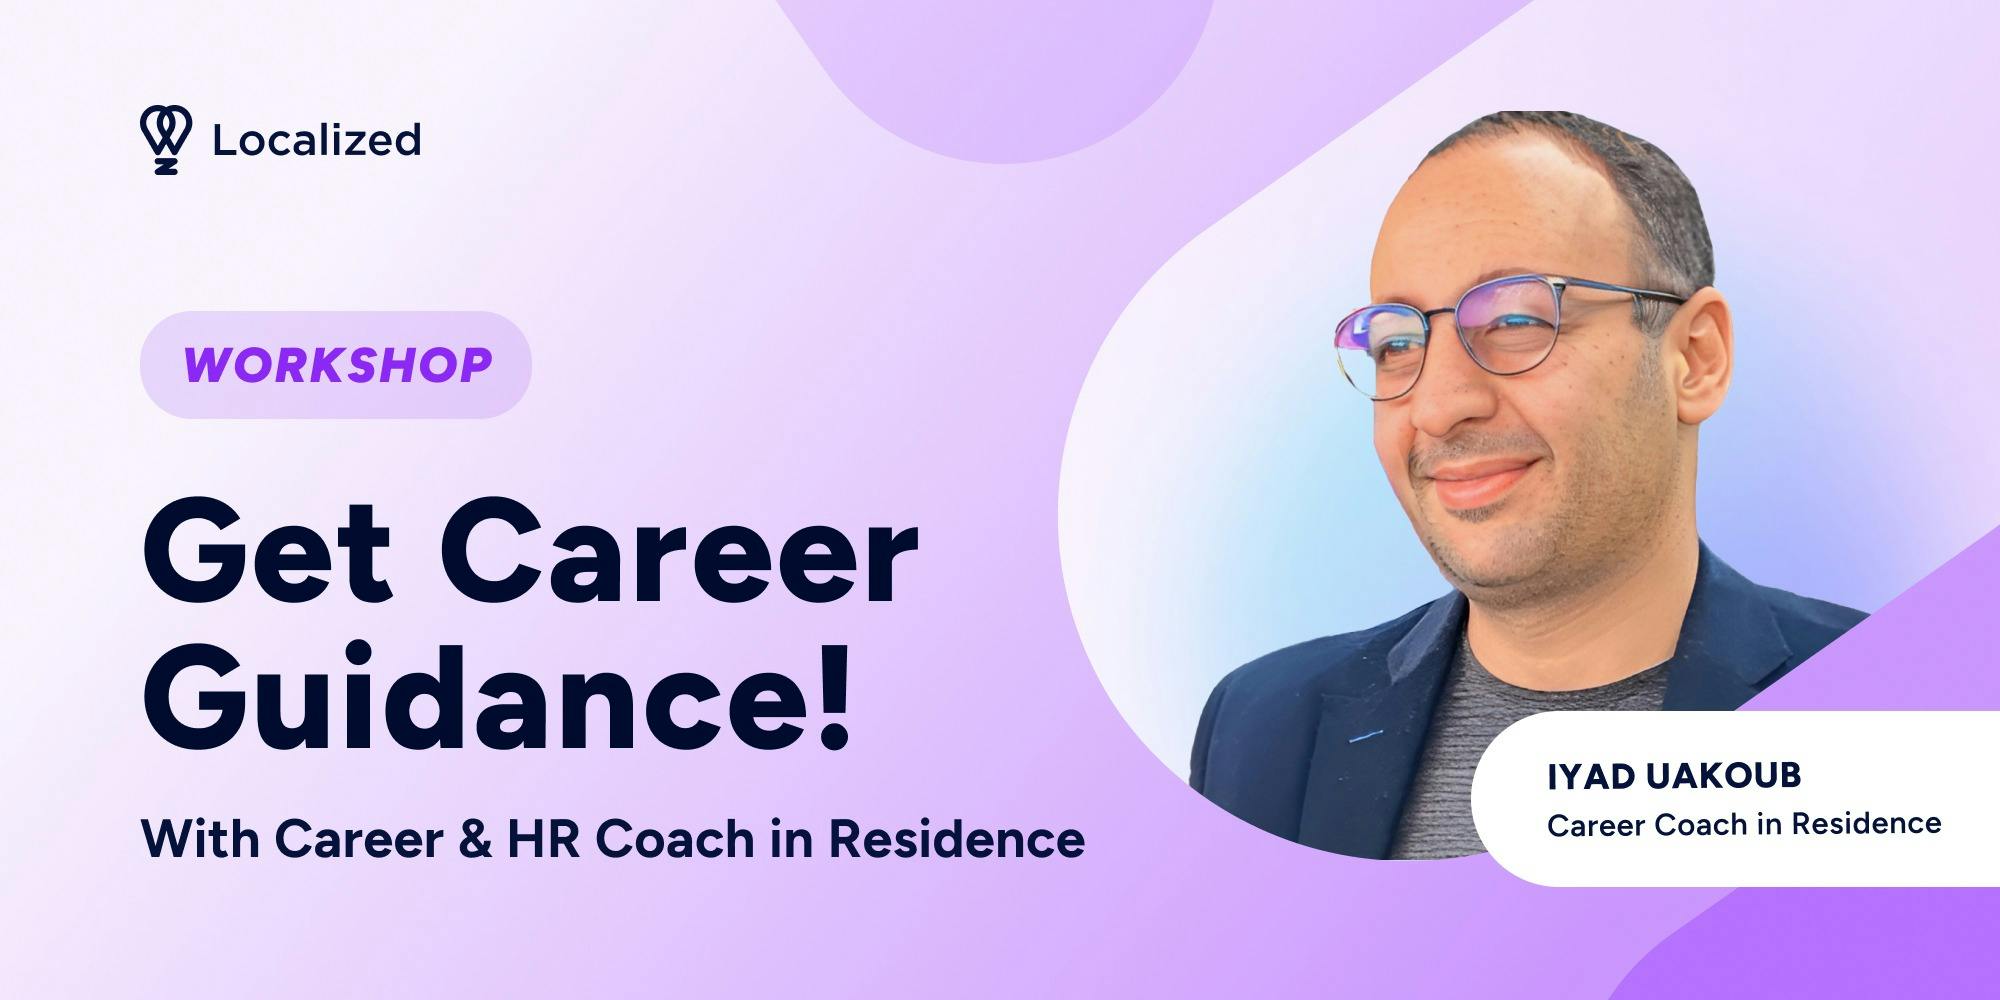 Get Career Guidance!: With Career & HR Coach in Residence